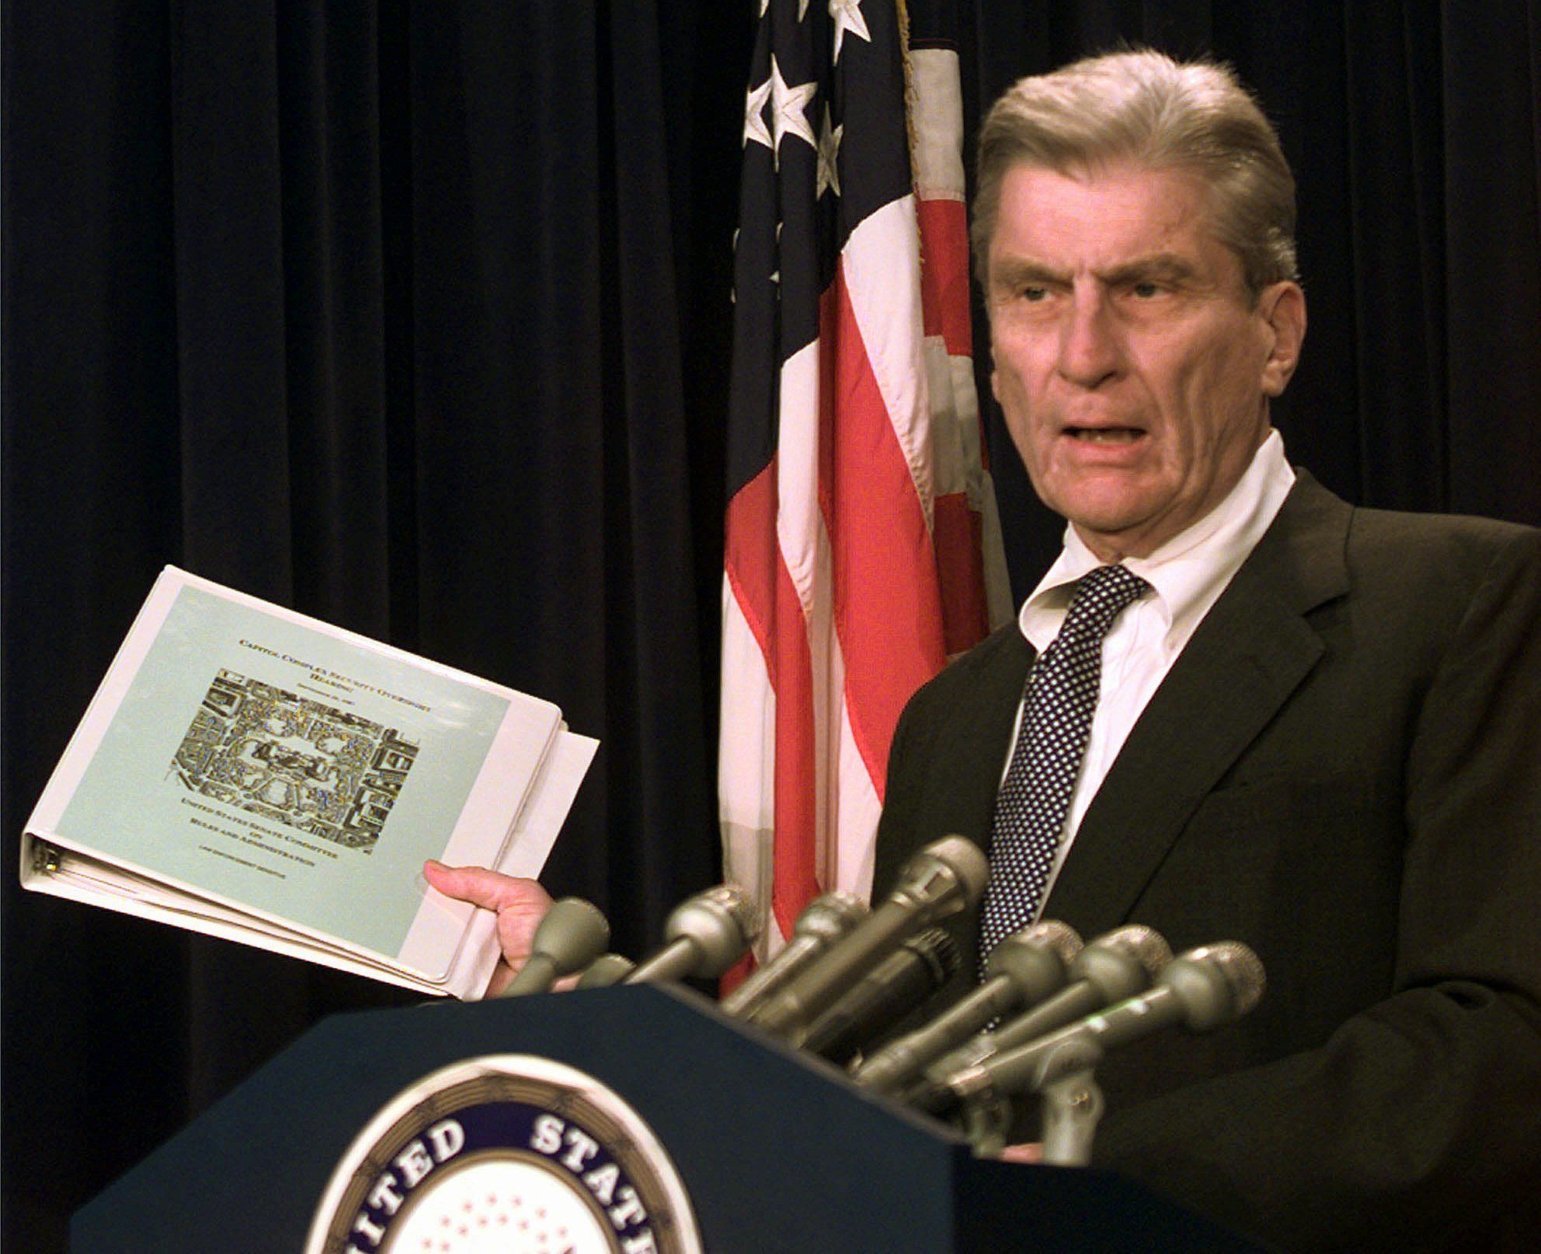 Senate Rules Committee Chairman Sen. John Warner, R-Va. holds the classified Senate Oversight Security plan during a Capitol Hill news conference Wednesday July 29, 1998 to discuss Capitol Security measures. Warner's committee oversees activities on the Capitol grounds. Republican leaders would like to push legislation through Congress this year for a new Capitol visitors center, after two fallen police officers who died protecting the building. (AP Photo/Joe Marquette)